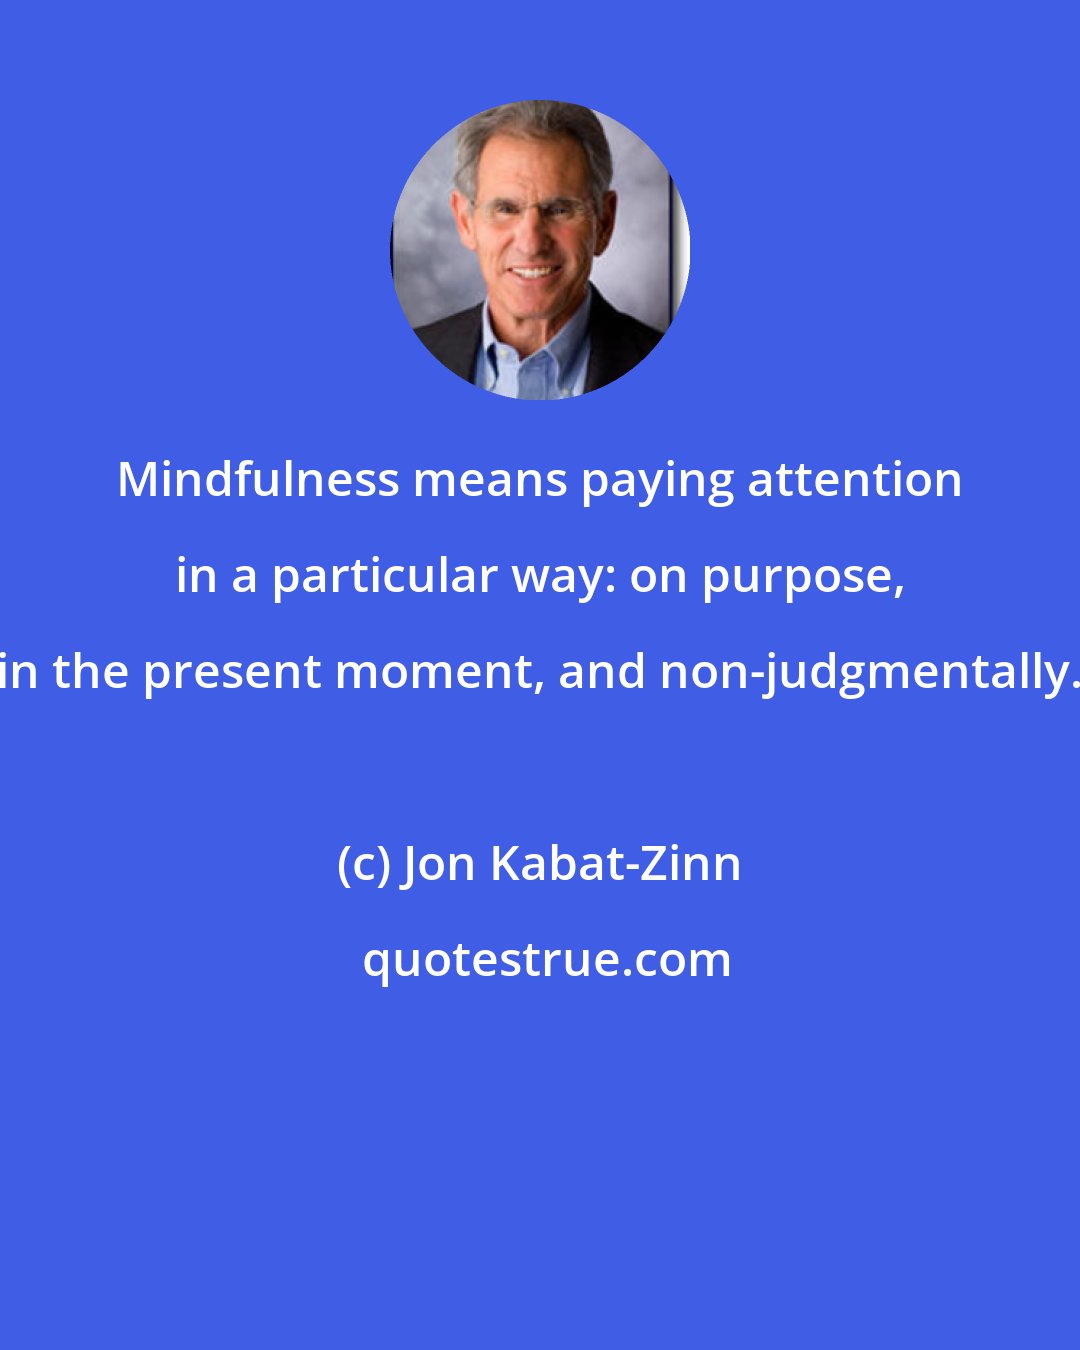 Jon Kabat-Zinn: Mindfulness means paying attention in a particular way: on purpose, in the present moment, and non-judgmentally.